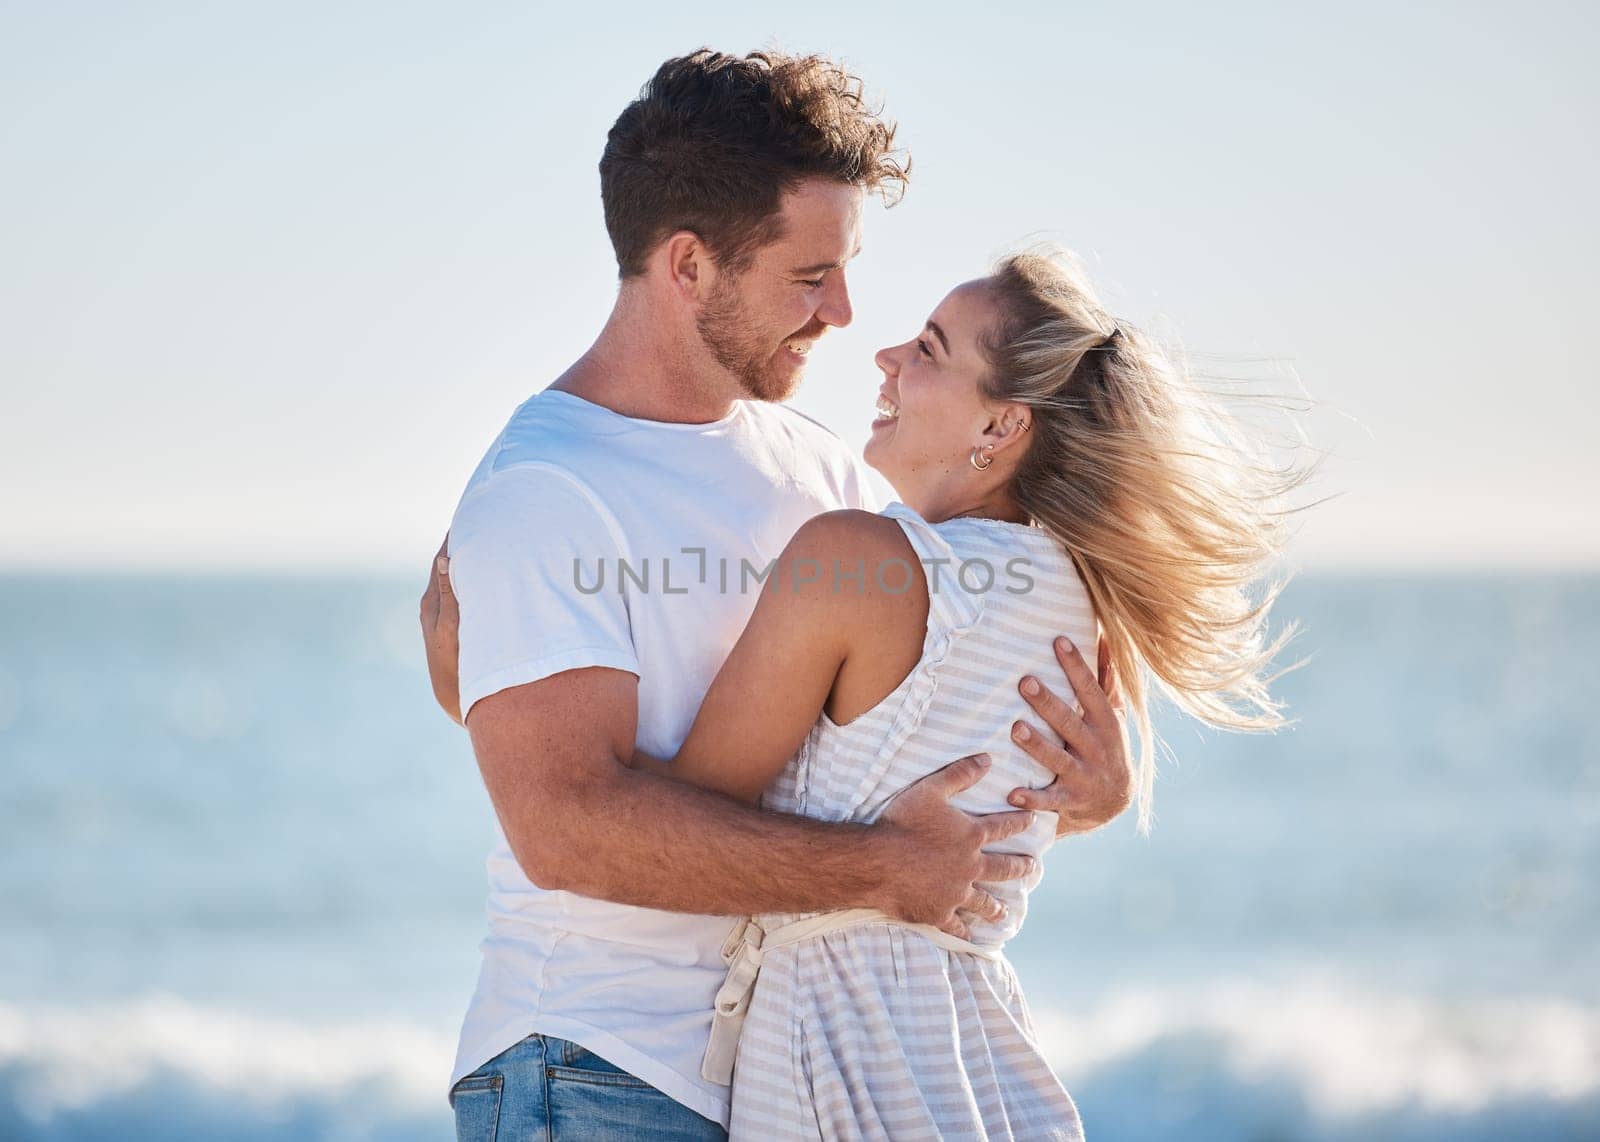 Love, beach hug and couple smile together at the ocean for peace, relax in nature and romance vacation happiness. Happy man, laughing woman and relationship bliss on a travel holiday by sea.